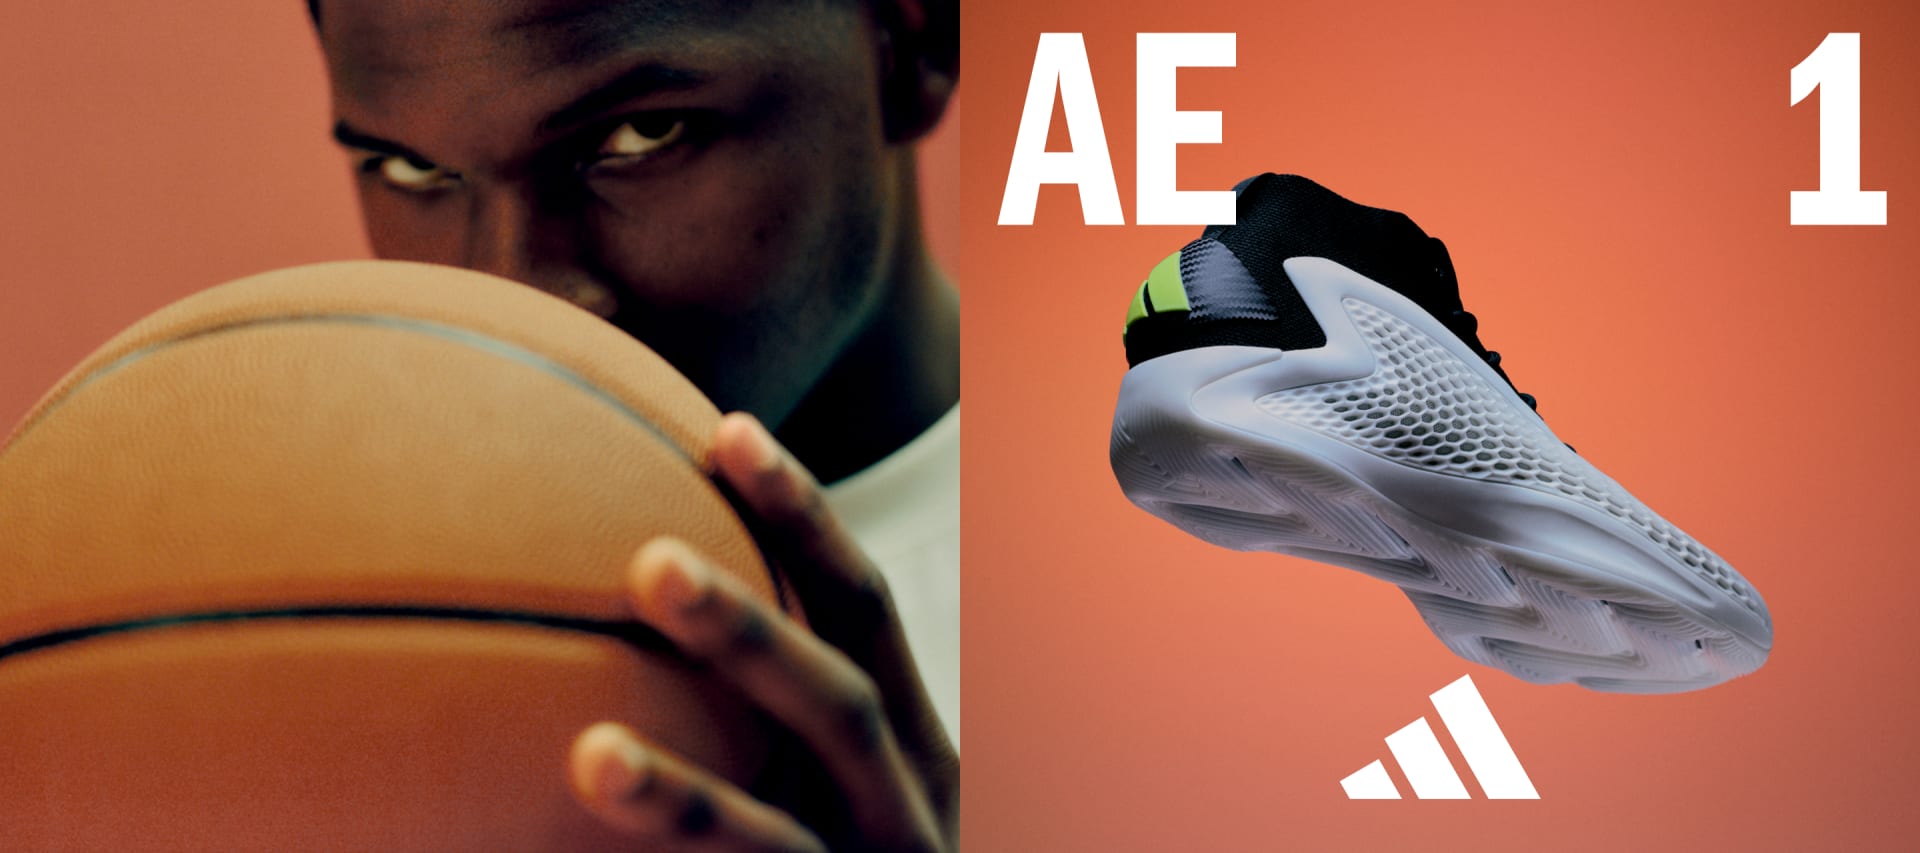 Composition of Anthony Edwards holding basketball and white and black shoe with green adidas logo.